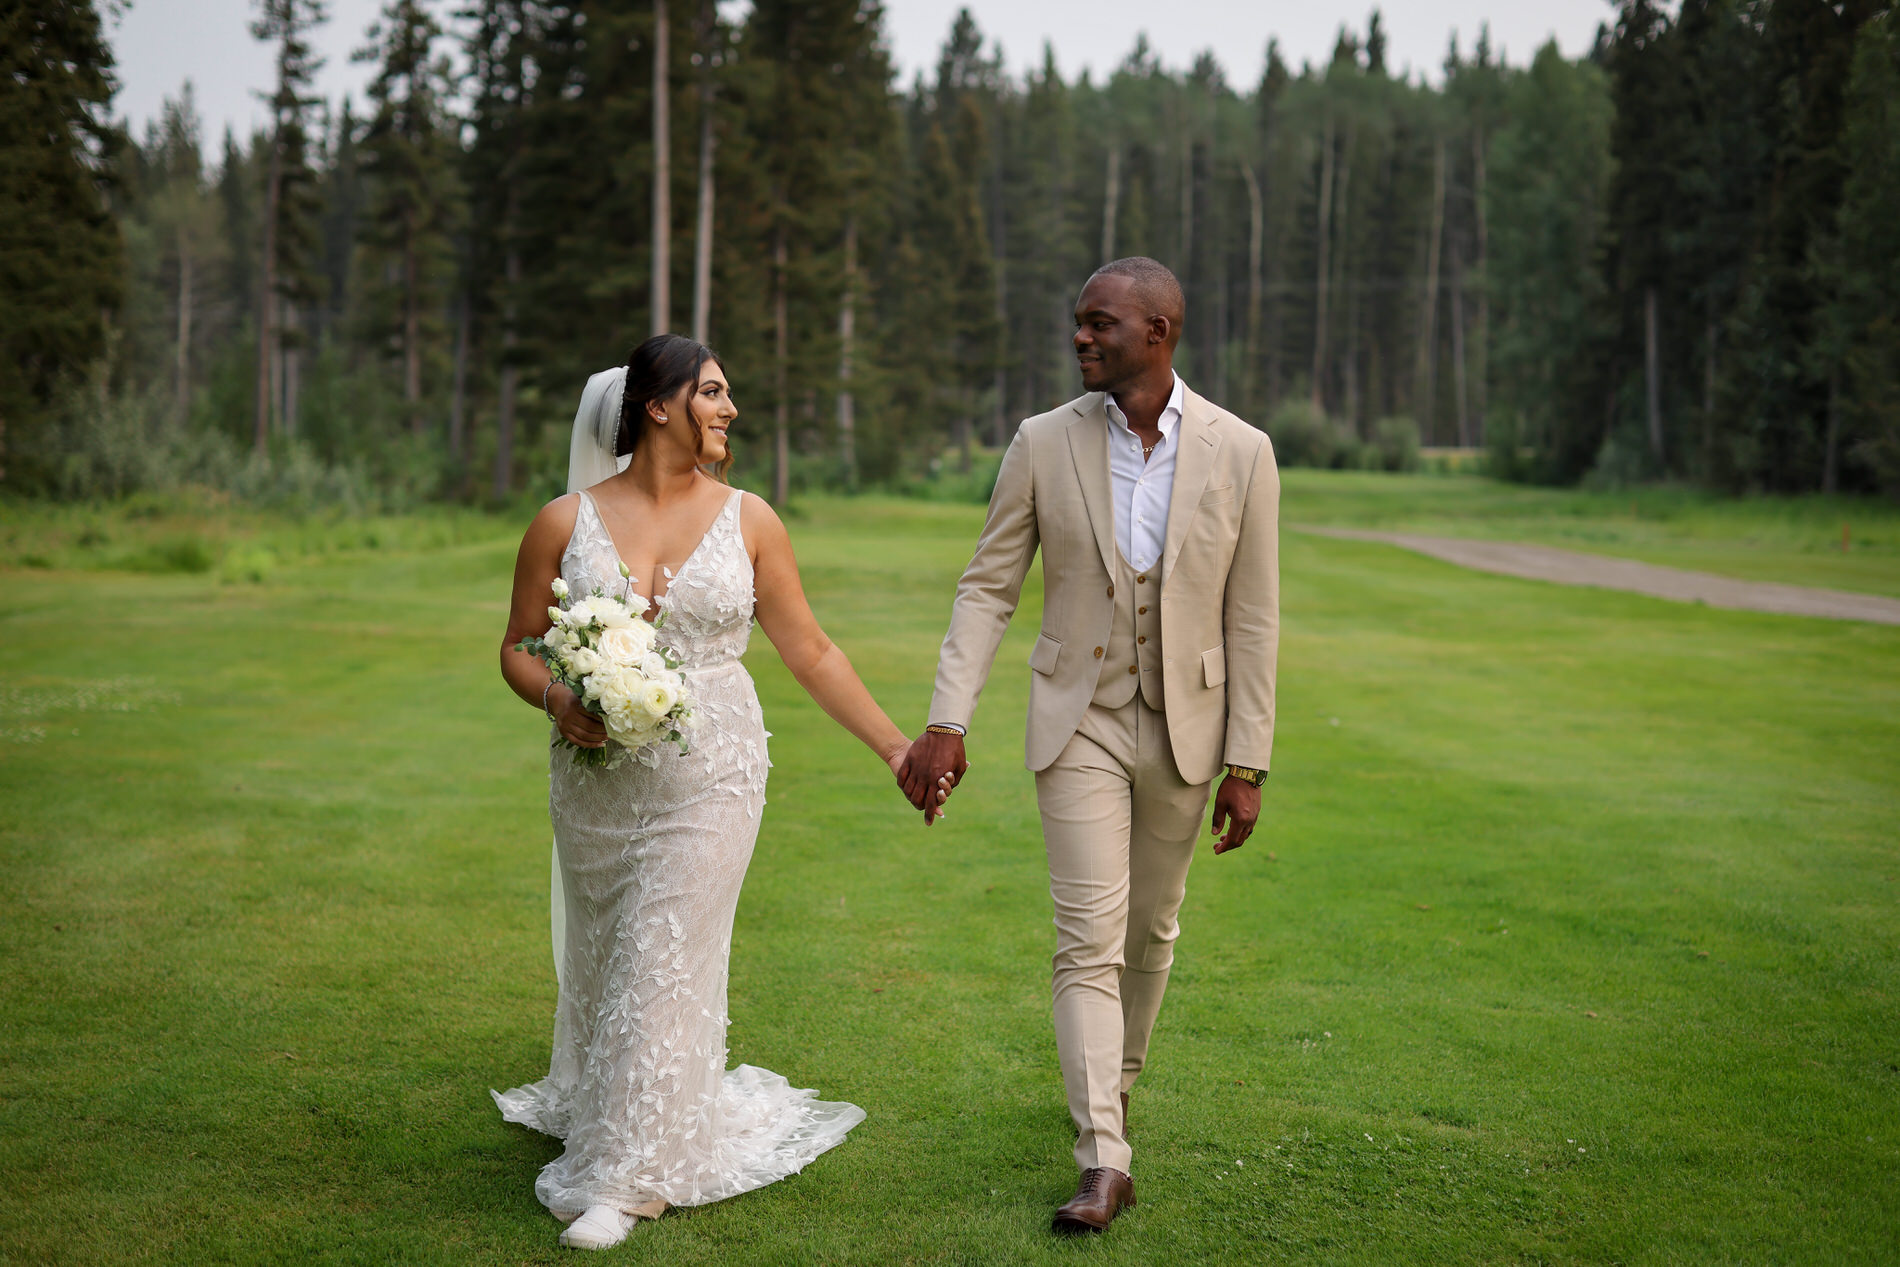 Bride and groom walk on Wintergreen golf course with amazing green grass on wedding day